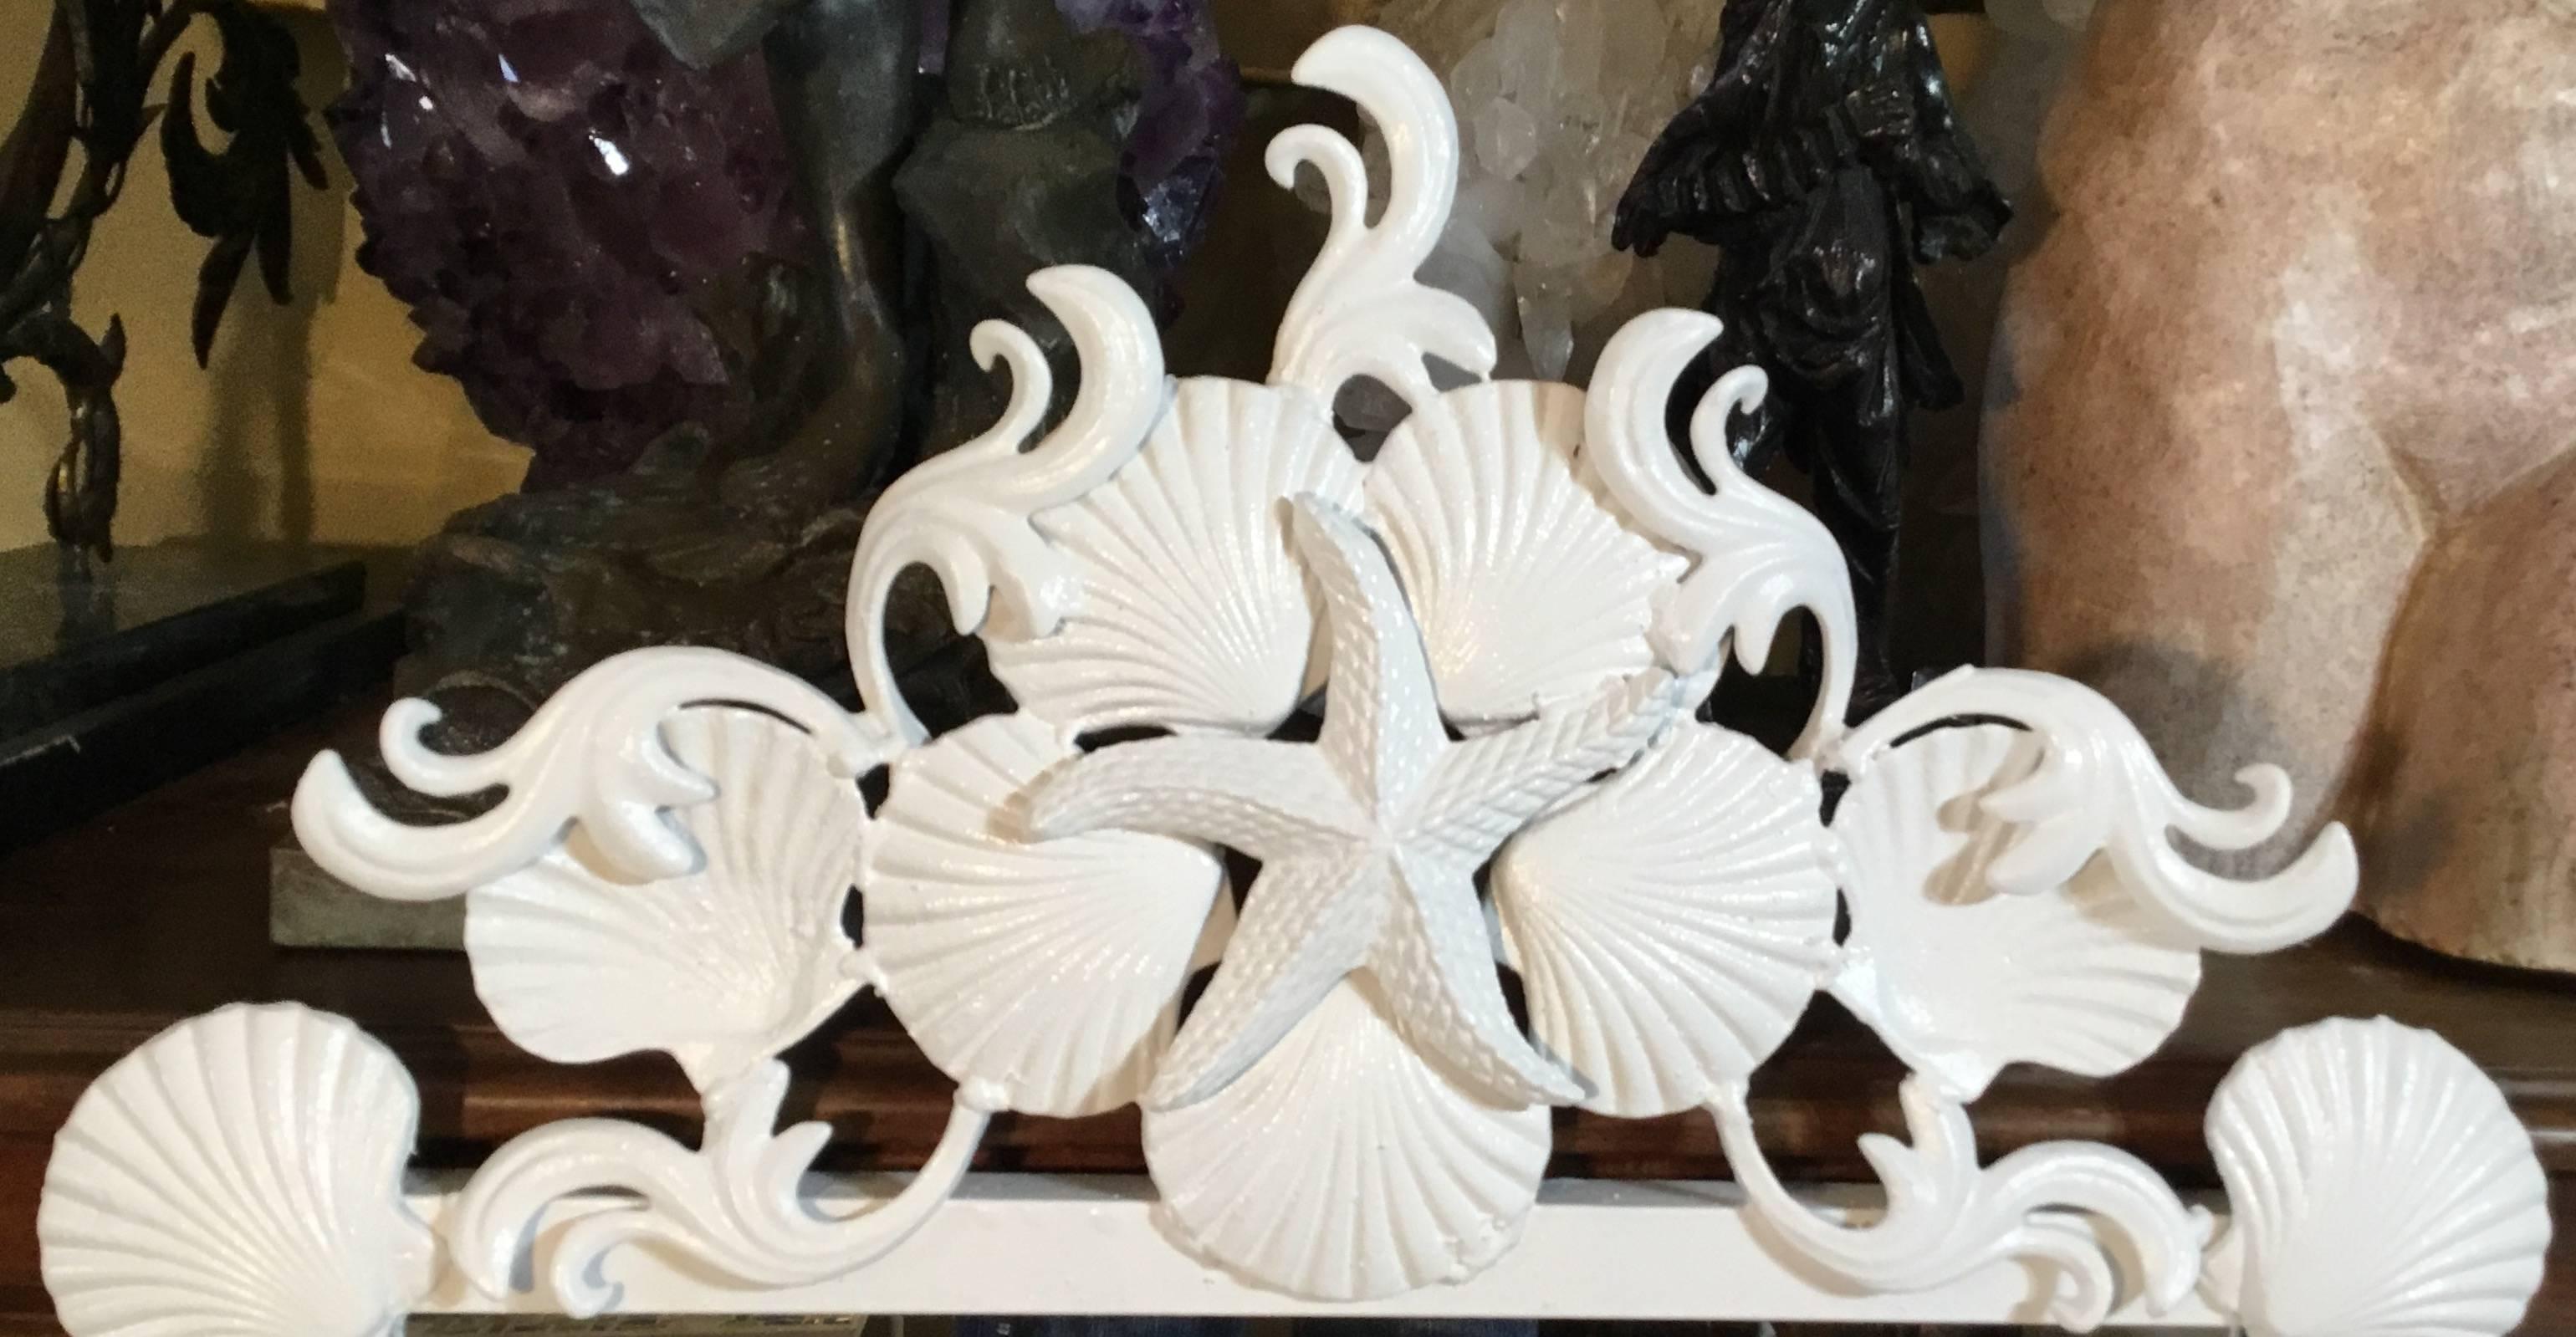 Pair of mirror made of iron, artistically decorated with sea shell and sea star motifs, painted in white.
Will sell single mirror upon request.